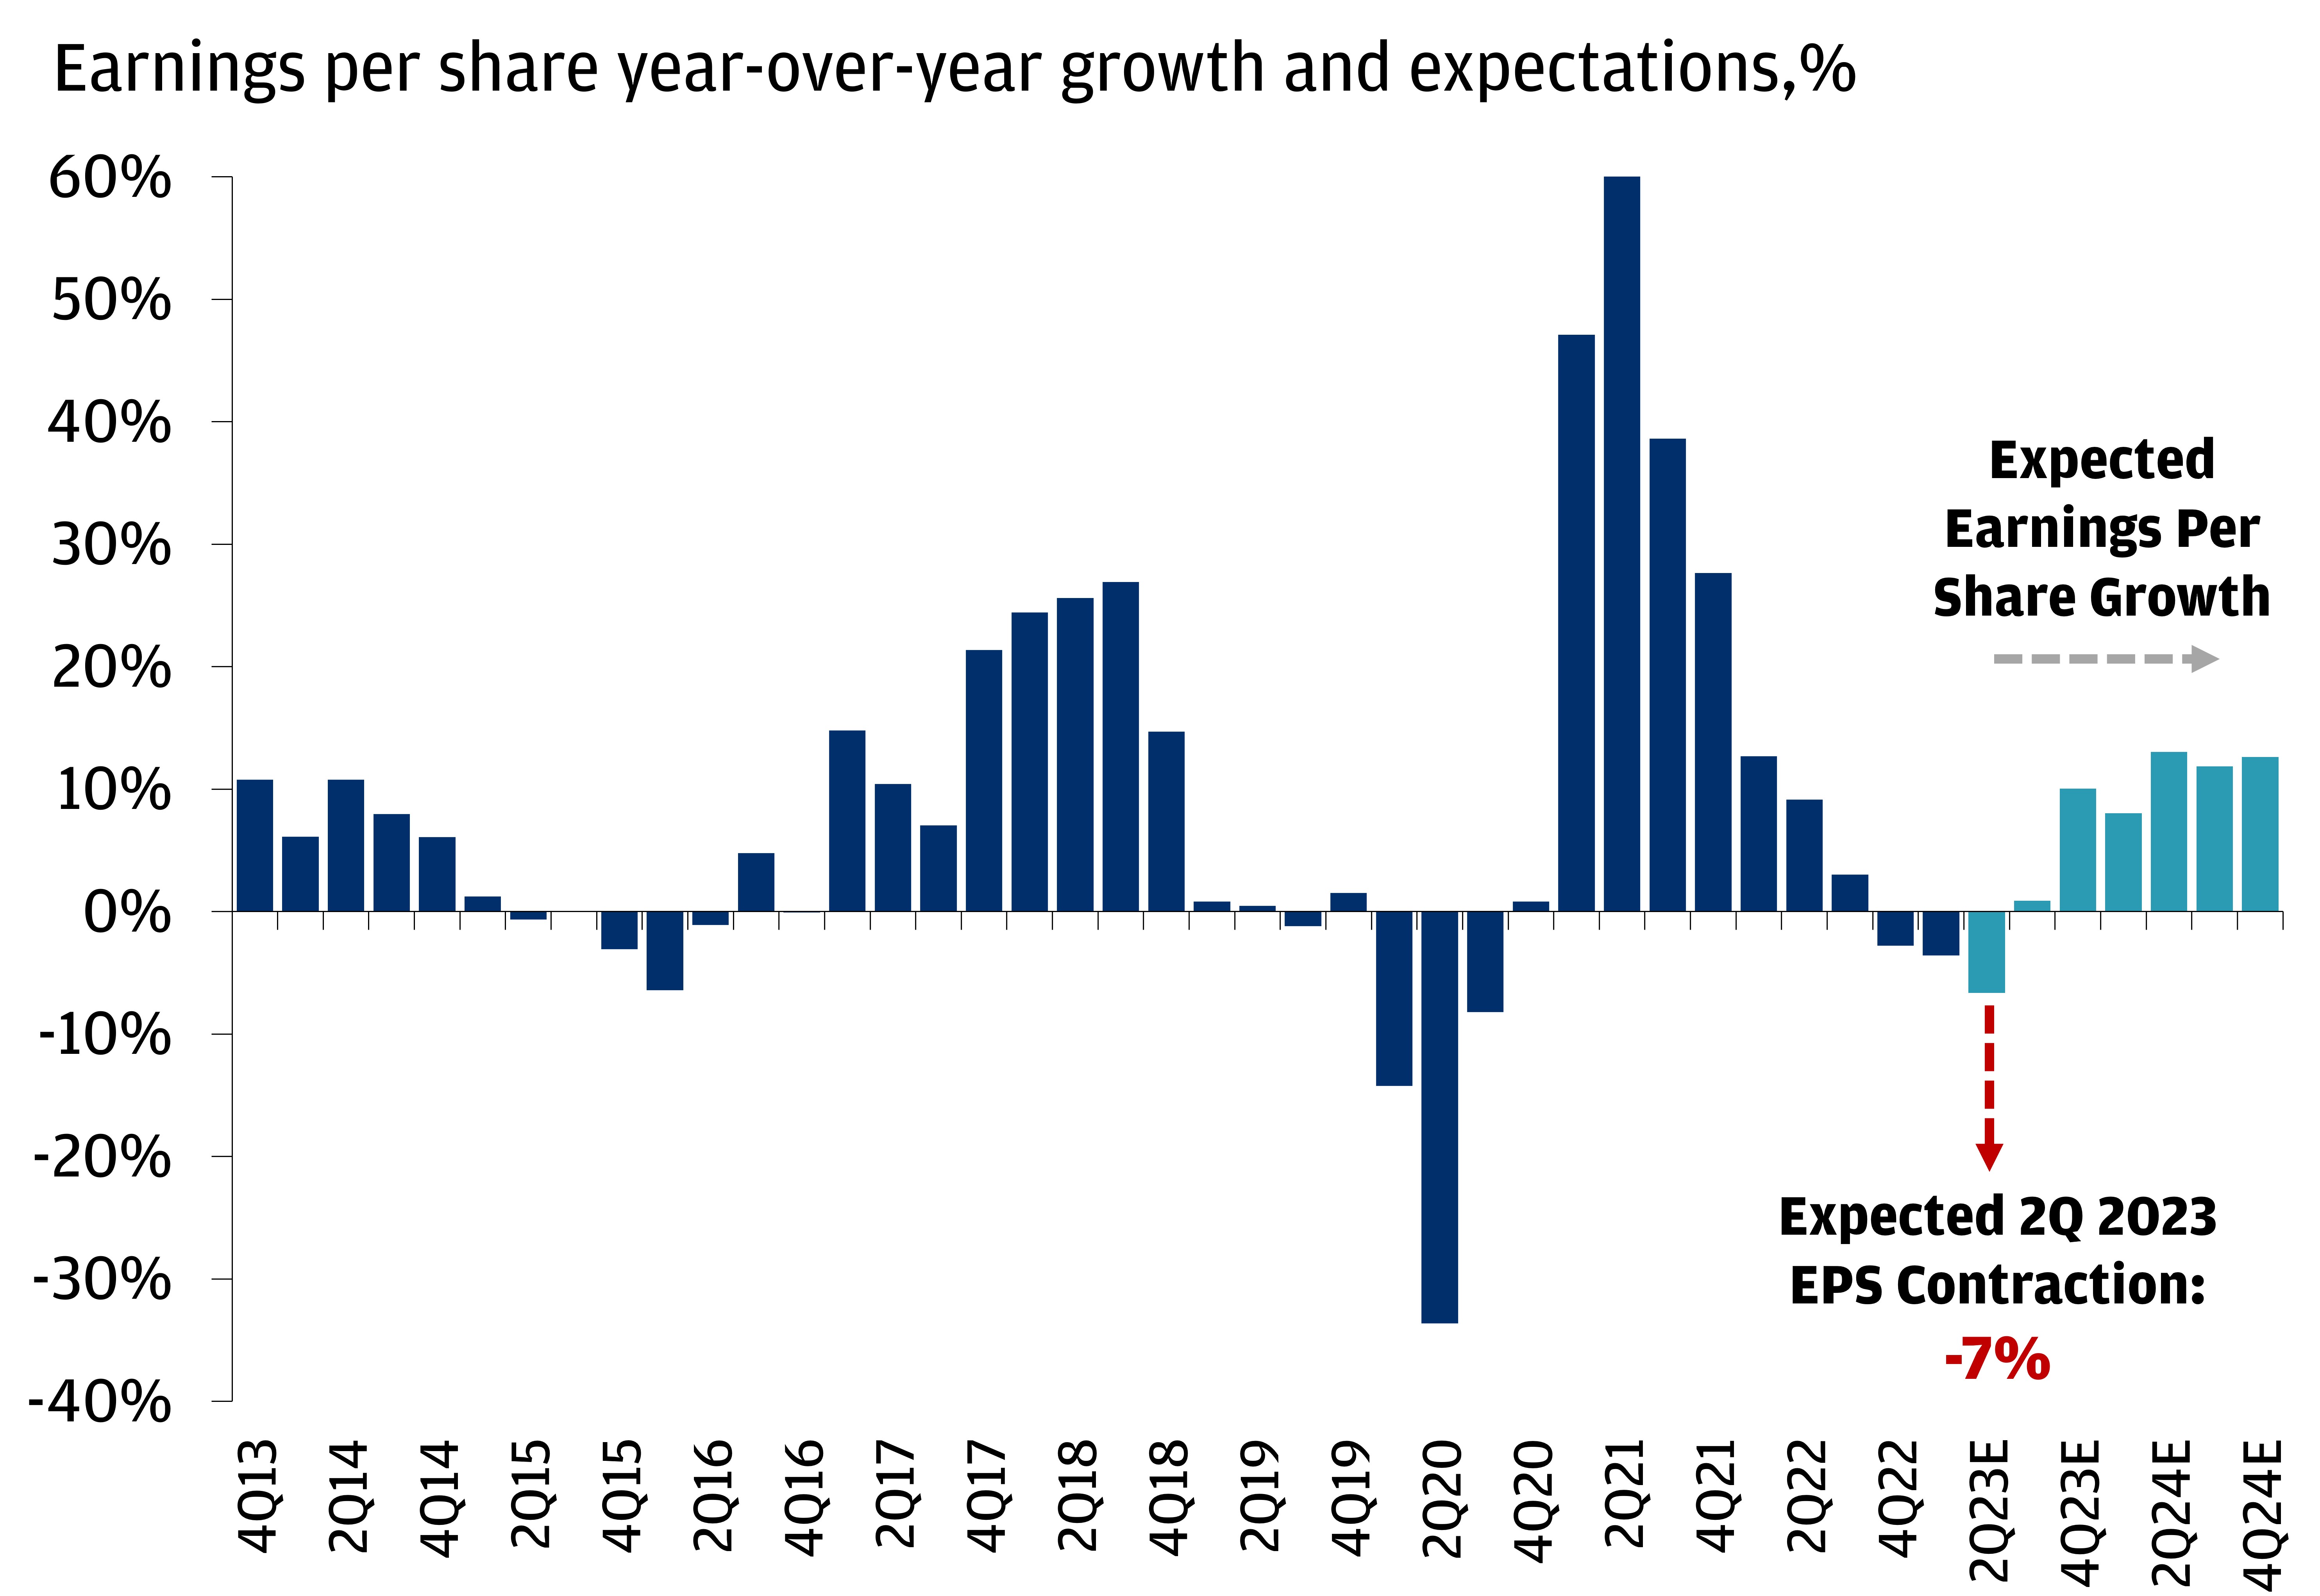 The chart is a bar graph of quarterly earnings per share growth on a year-over-year as a percentage starting in the fourth quarter of 2013 and ending with expected earnings growth in the fourth quarter of 2024.